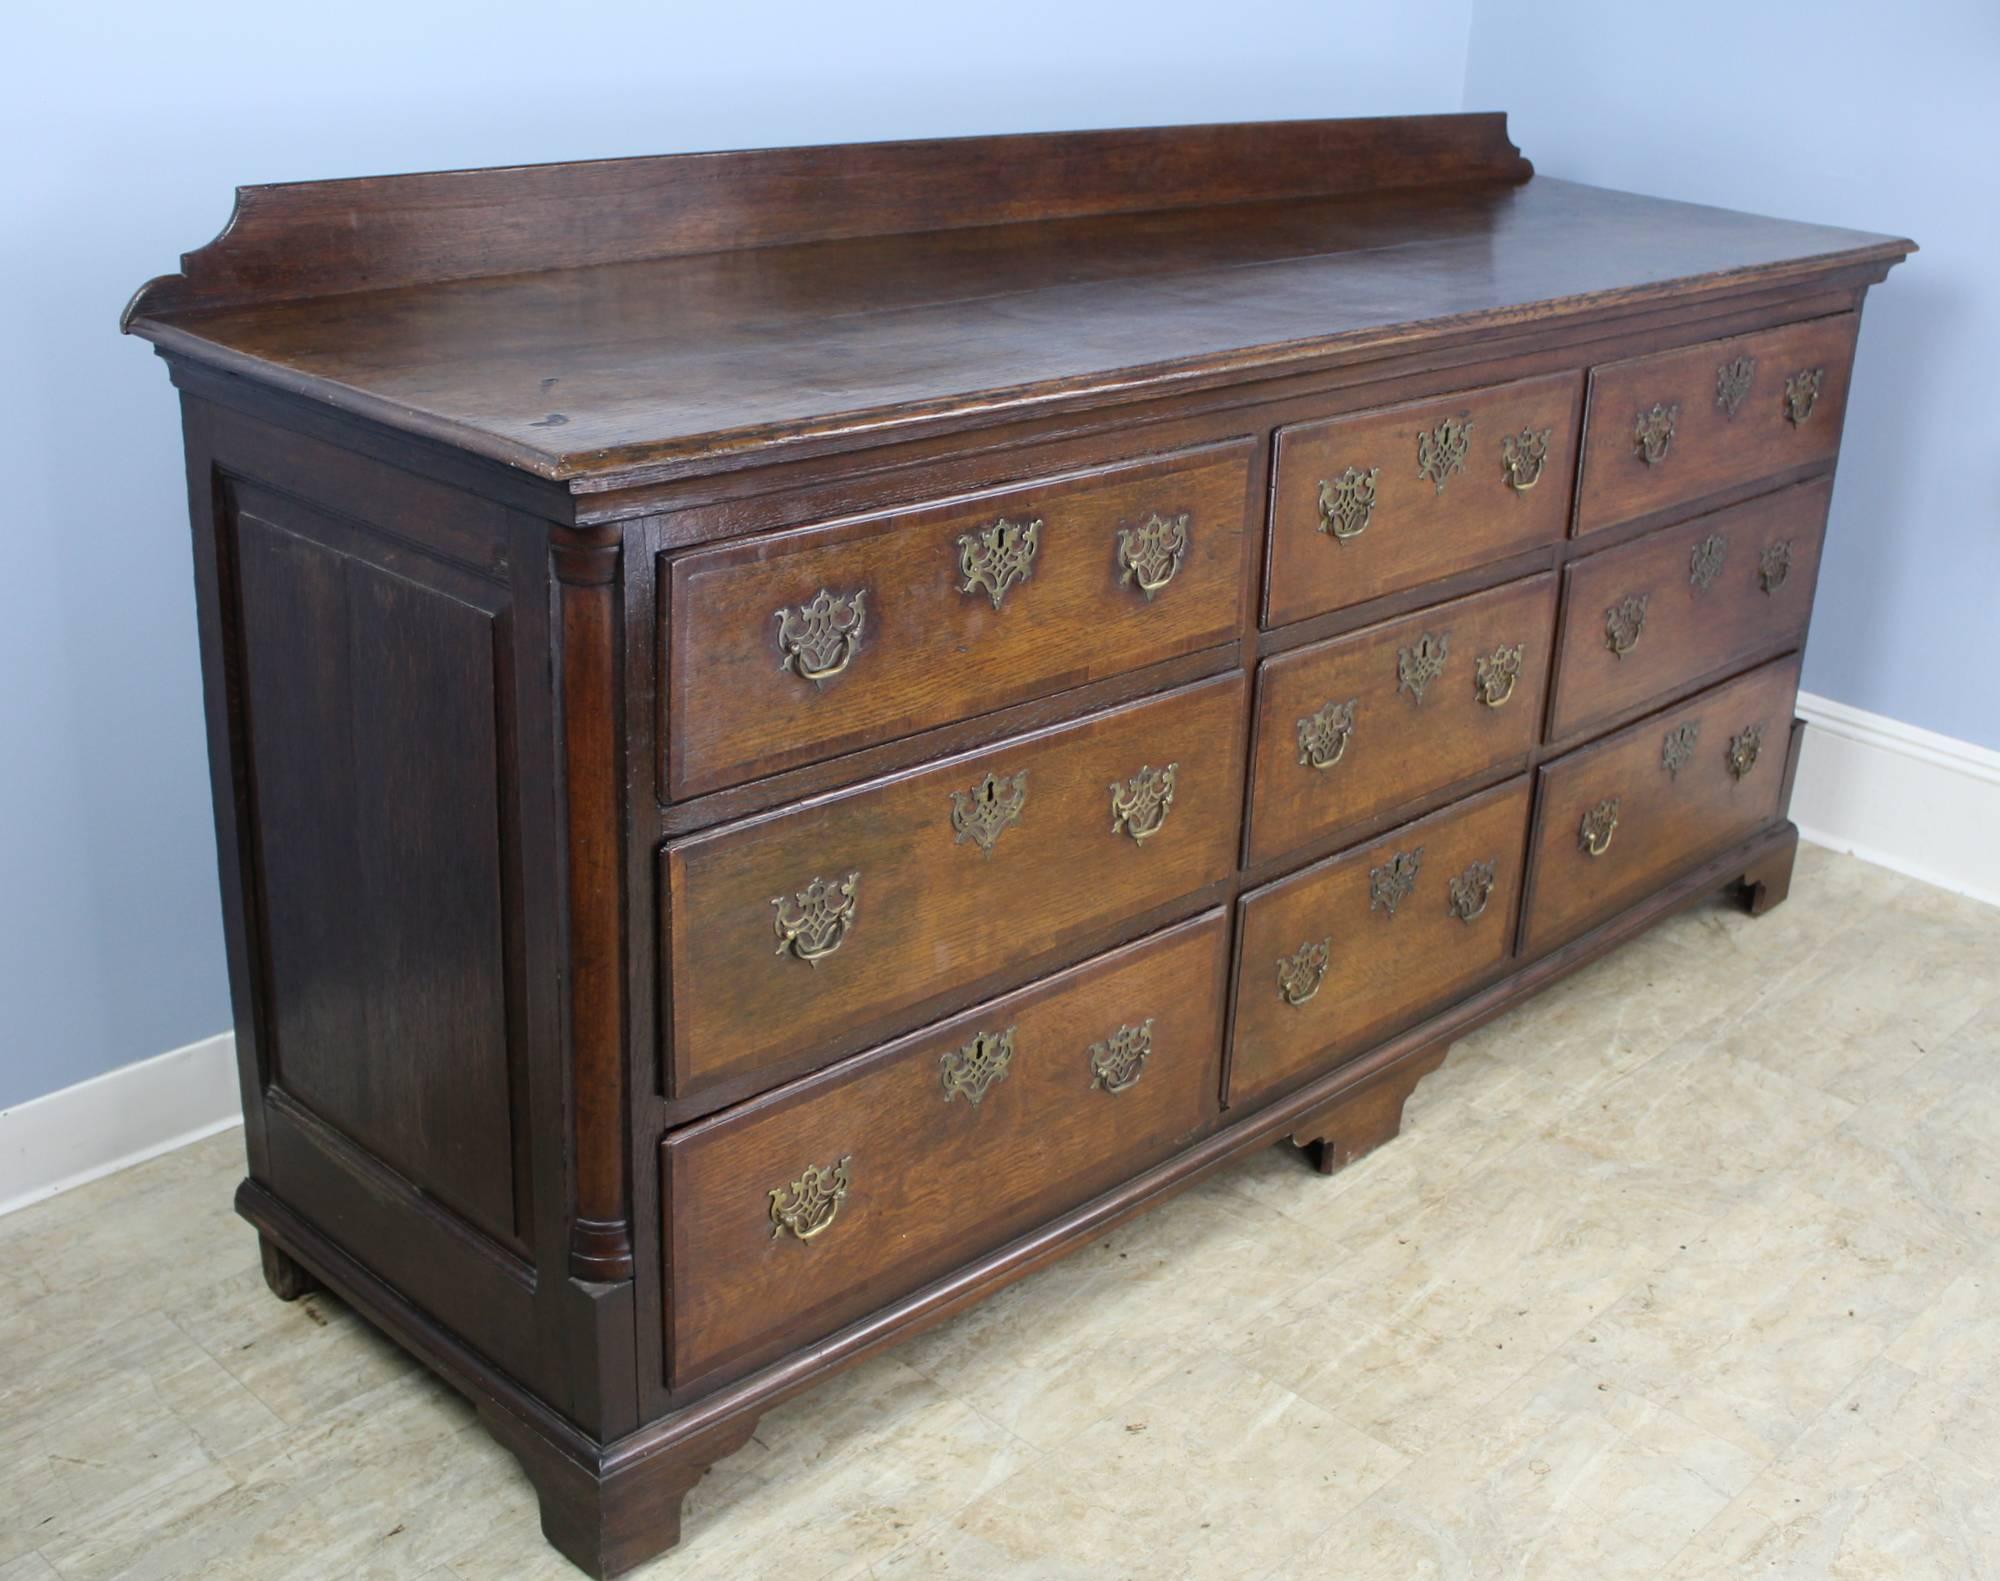 A large and dramatic nine-drawer 18th century enfilade or sideboard, very attractive with good patina and shine. The top is has a galleried back, and a good molding. Attractive brasses. At just under seven feet wide, this is a very practical piece.